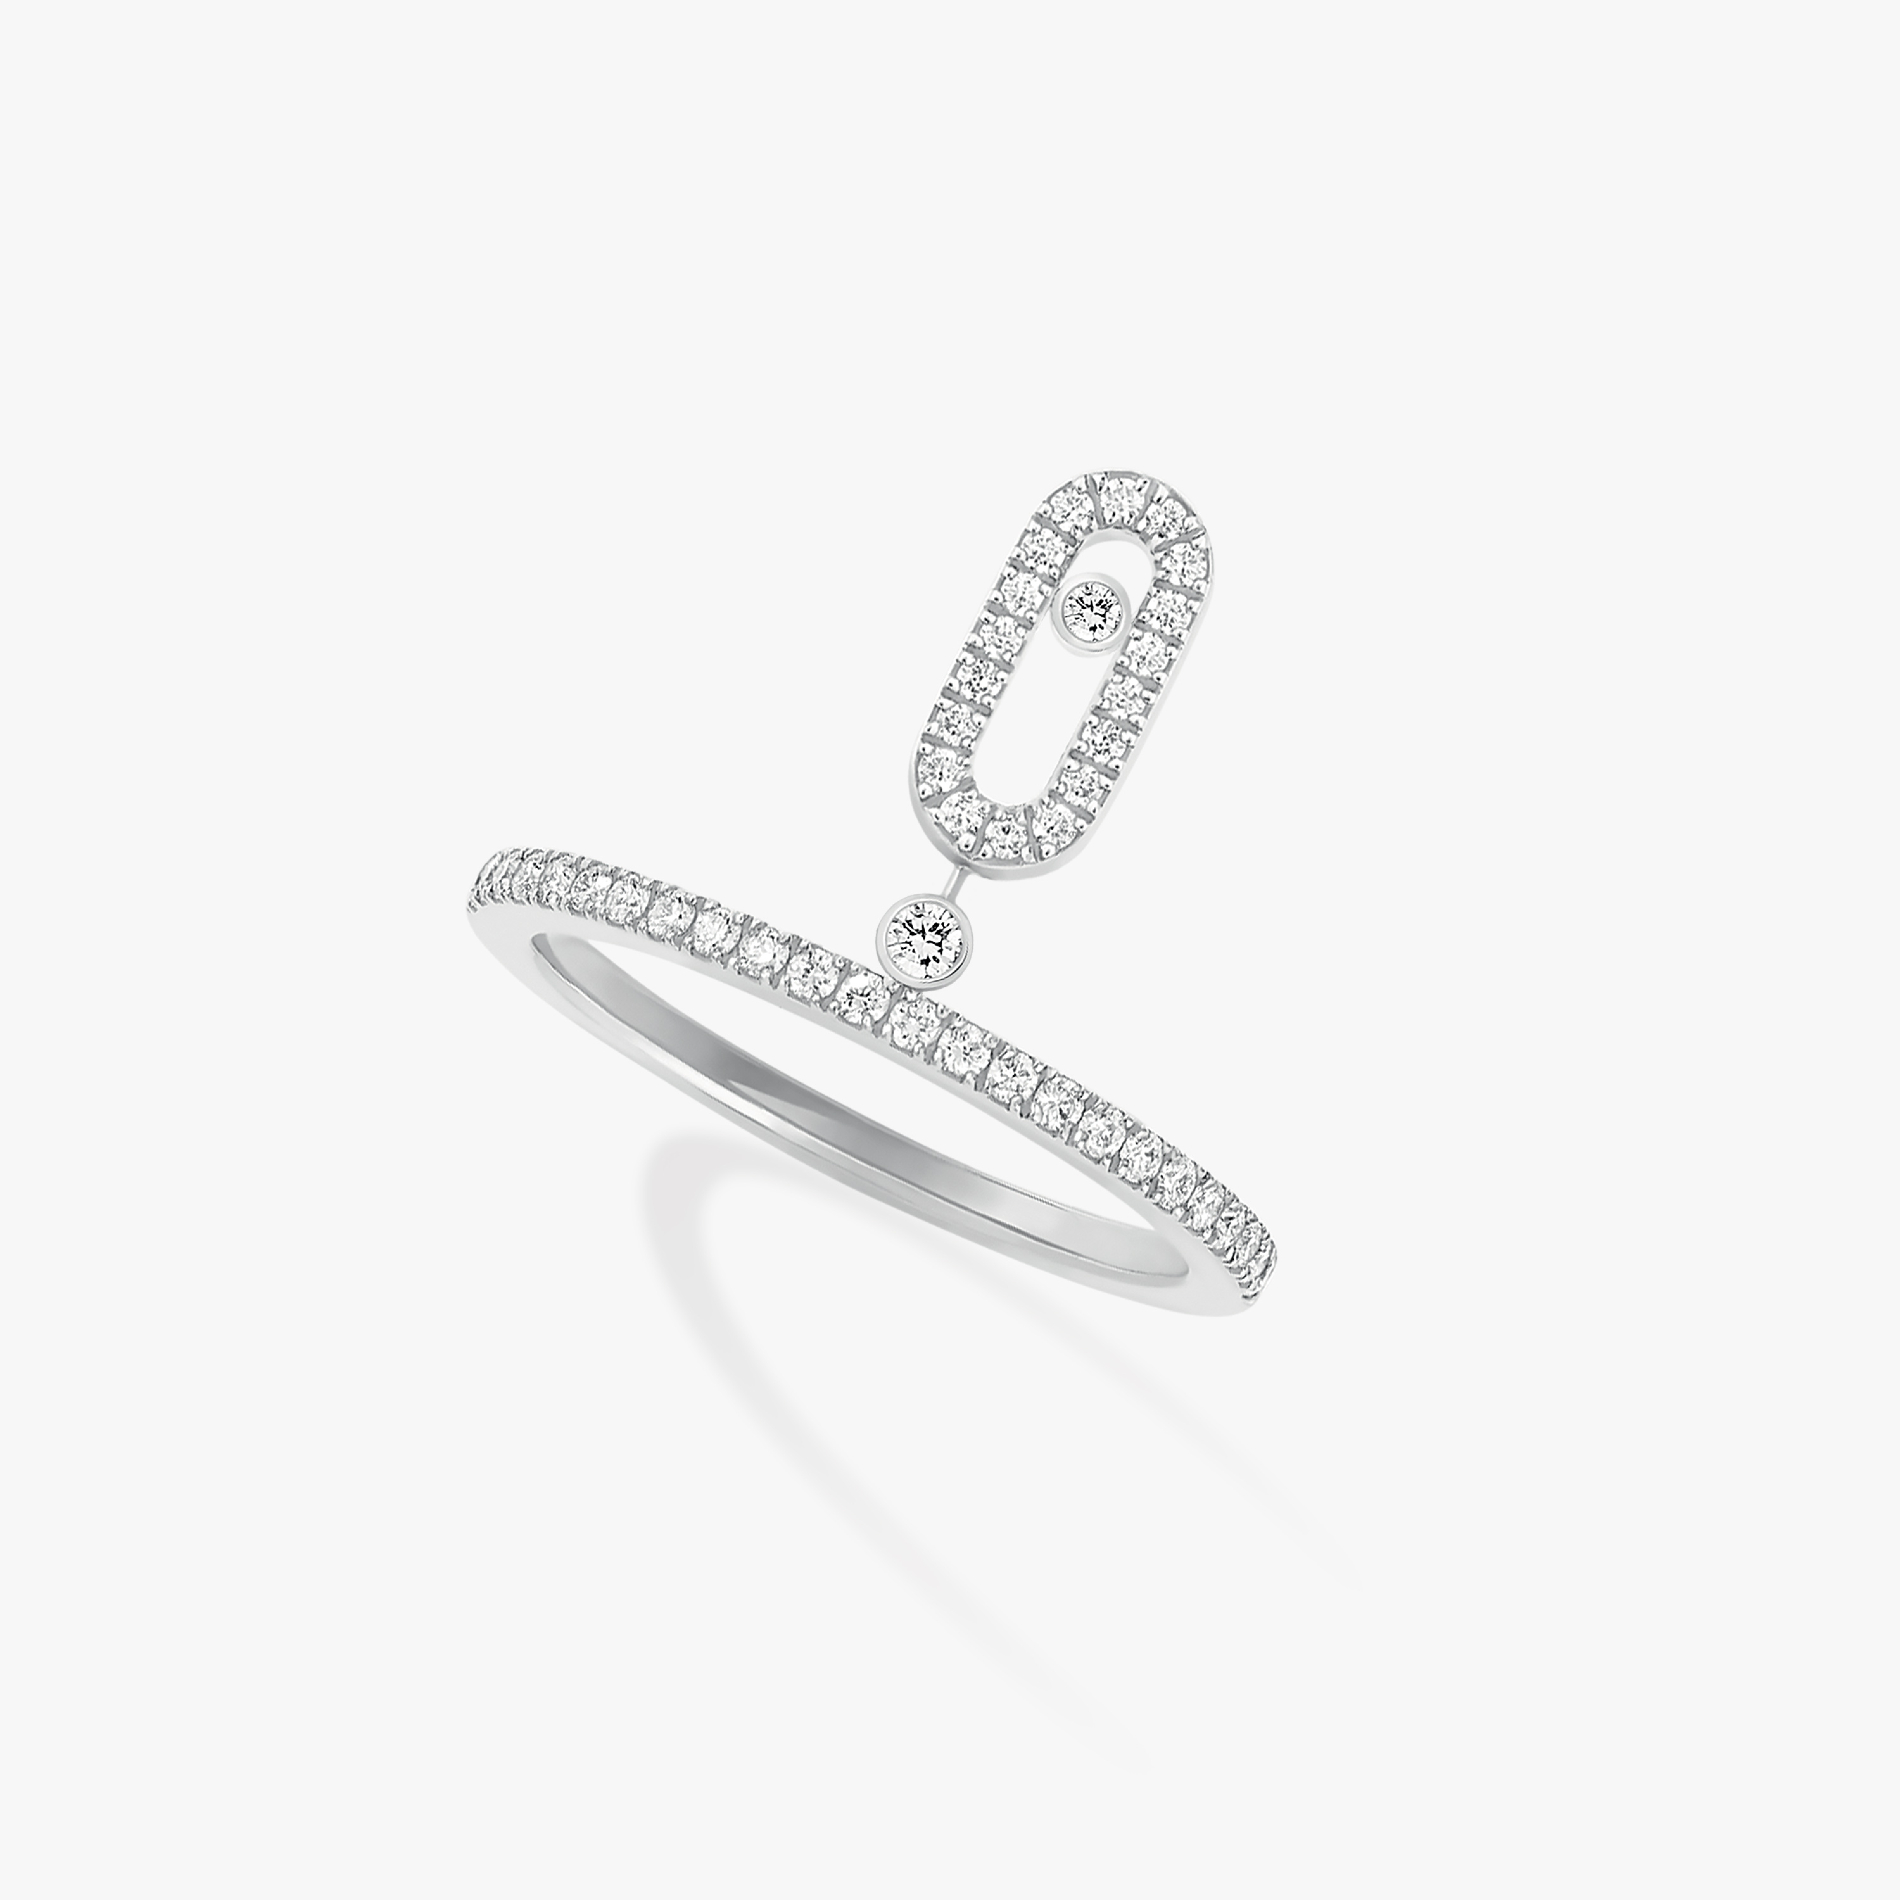 Bague Femme Or Blanc Diamant Move Uno Pampille Pavée 11163-WG